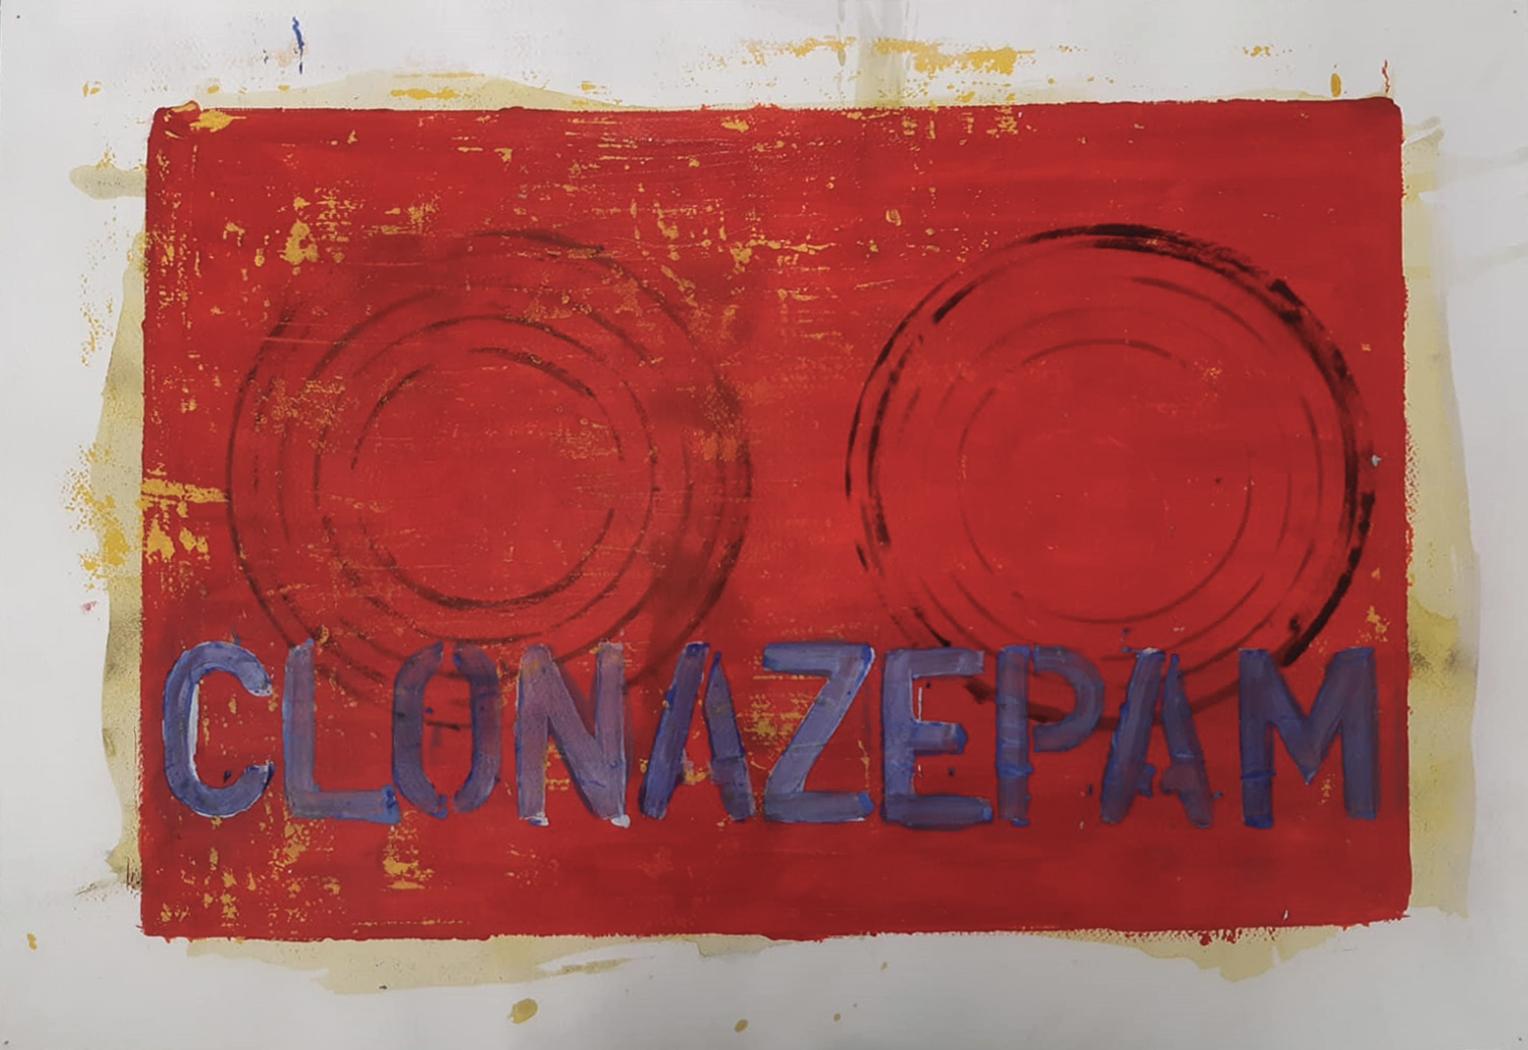 Clonazepam, by Sergio Bazan
From the Chaleco Quimico series
Acrylic paint on paper
Image Size: 18 H x 25 W inches
Unframed

Signed by artist

_______

The paintings of Sergio Bazán have a strong gesture and expressionist imprint, firm and consistent